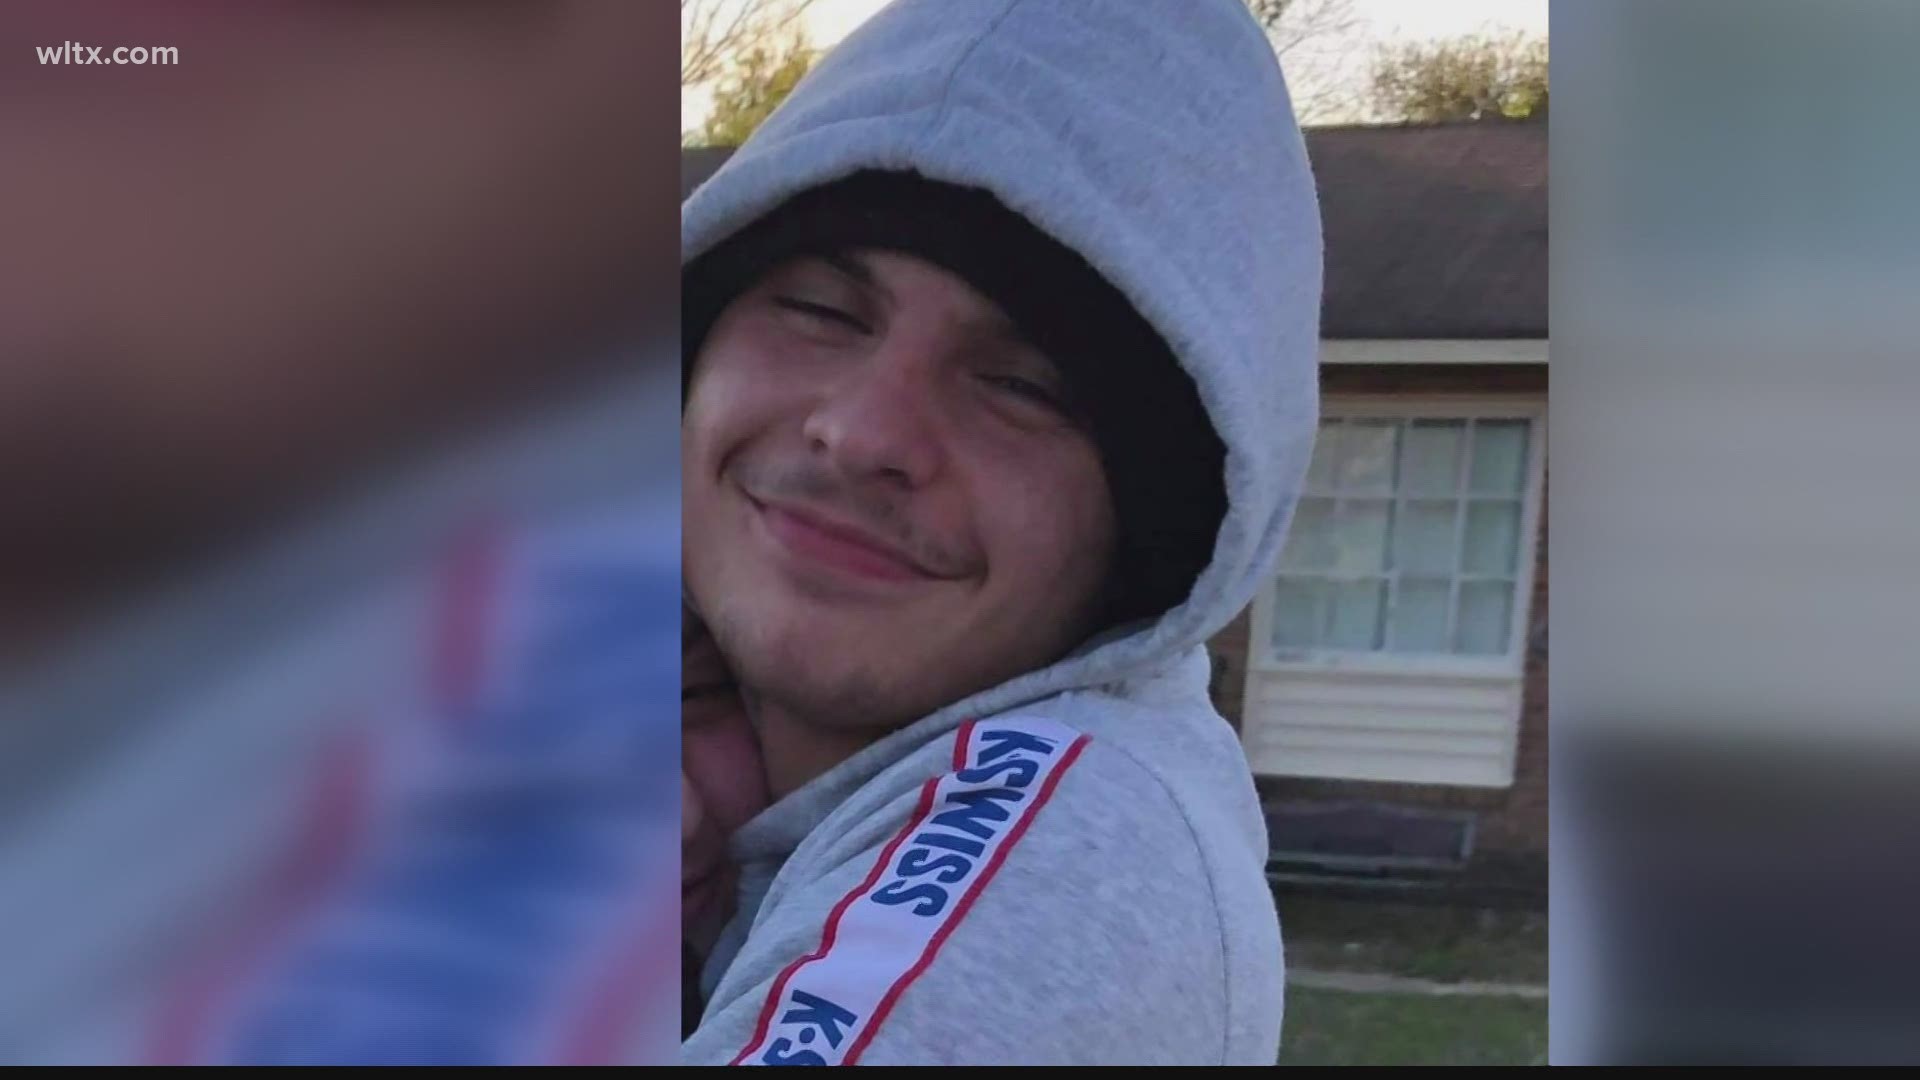 Brent Garcia, 18 was last seen leaving a relatives home in Sumter in December.